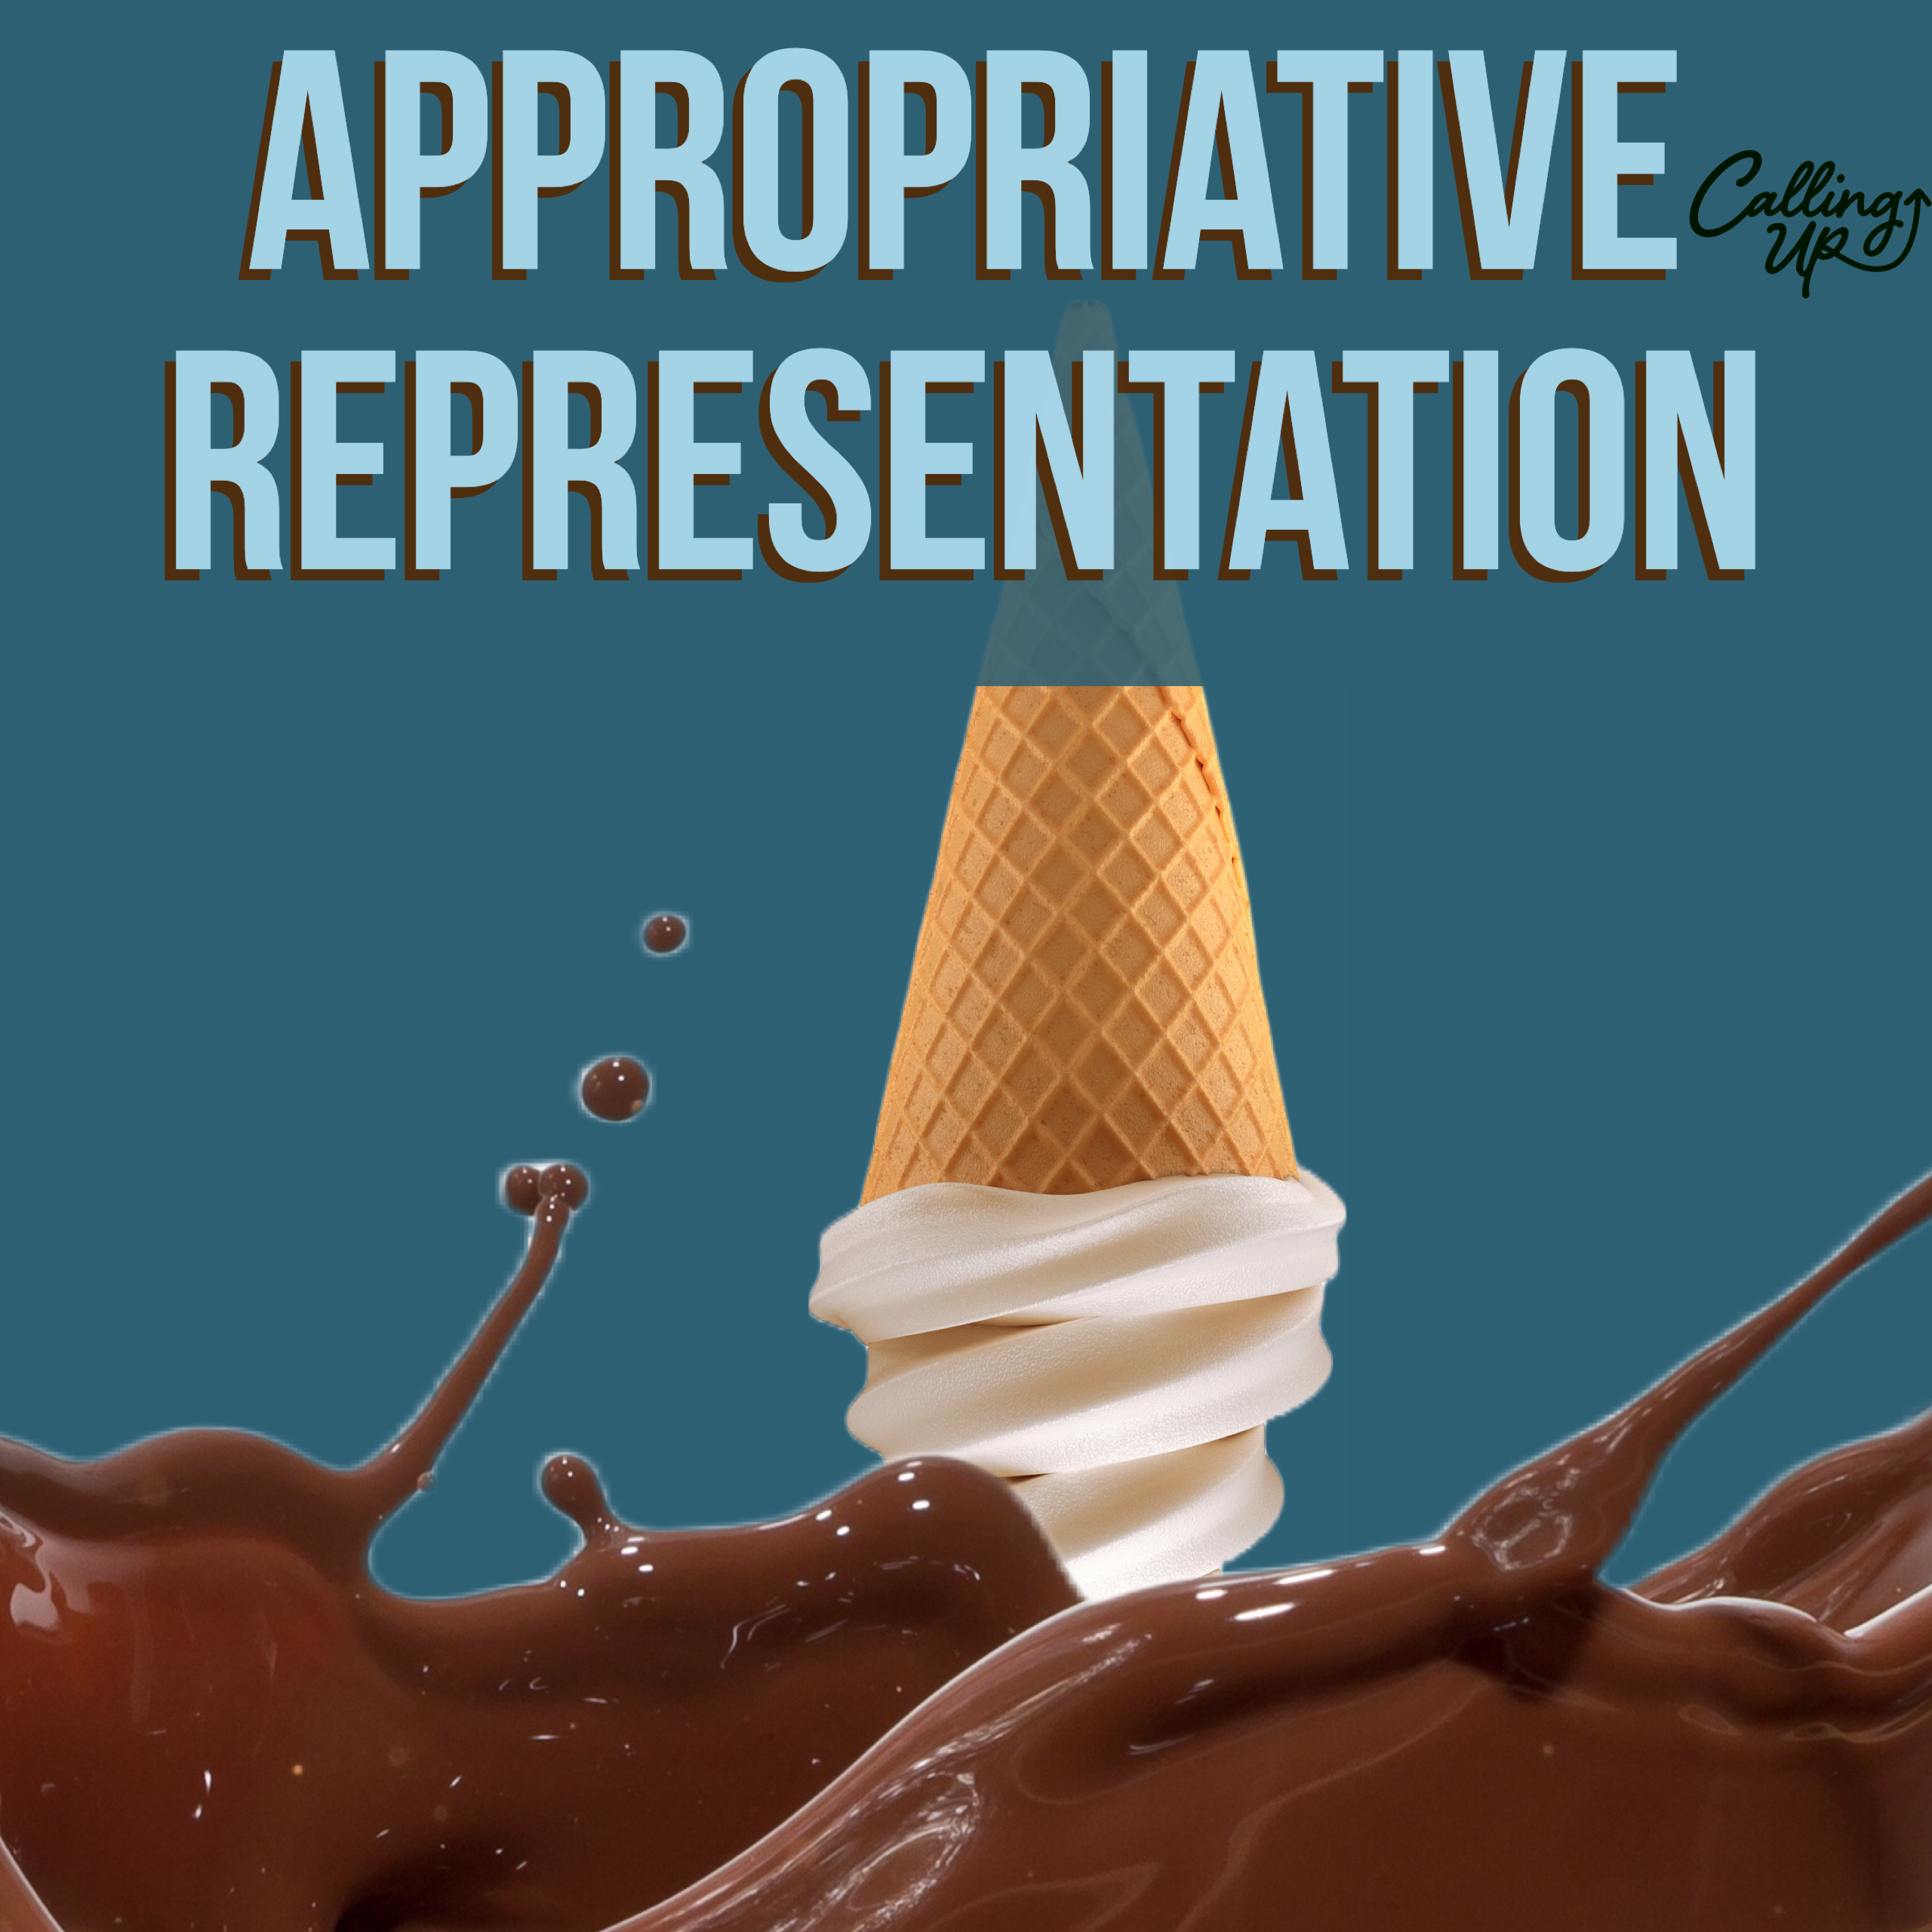 Image description: Text the reads “Appropriative Representation” with image of vanilla ice cream being dipped in chocolate.